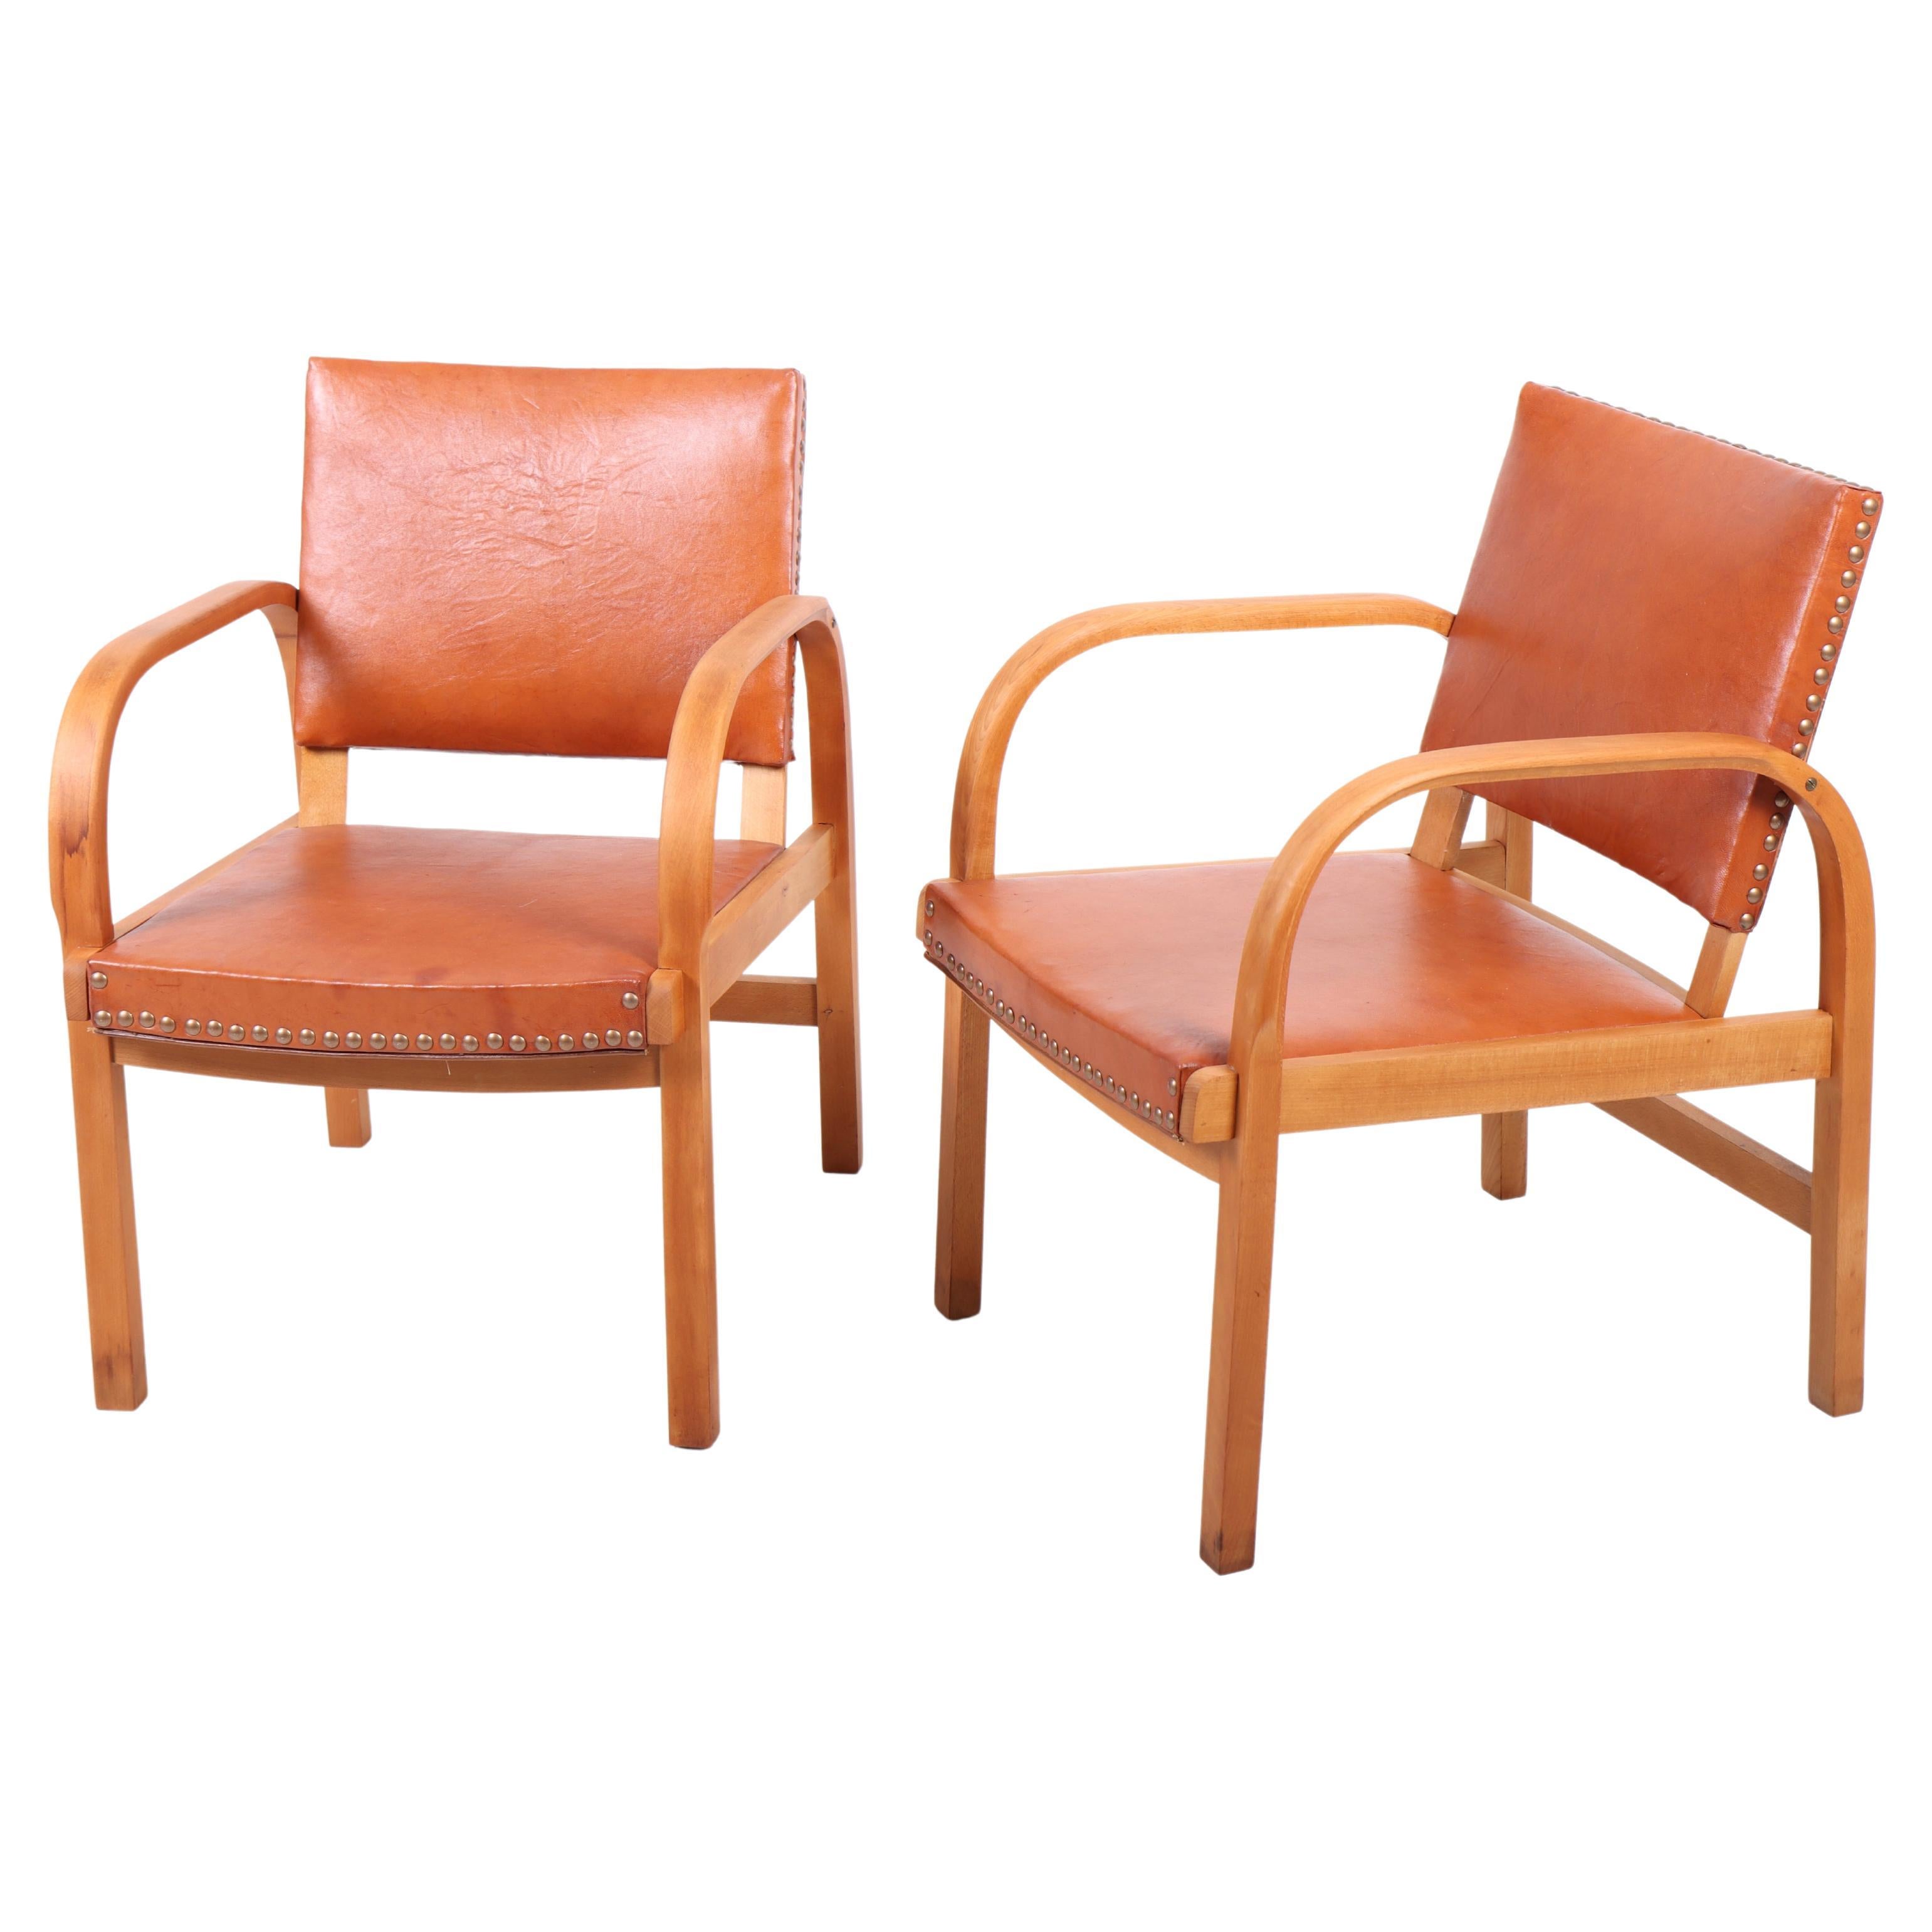 Pair of Danish Lounge Chairs by Magnus L. Stephensen, 1940s